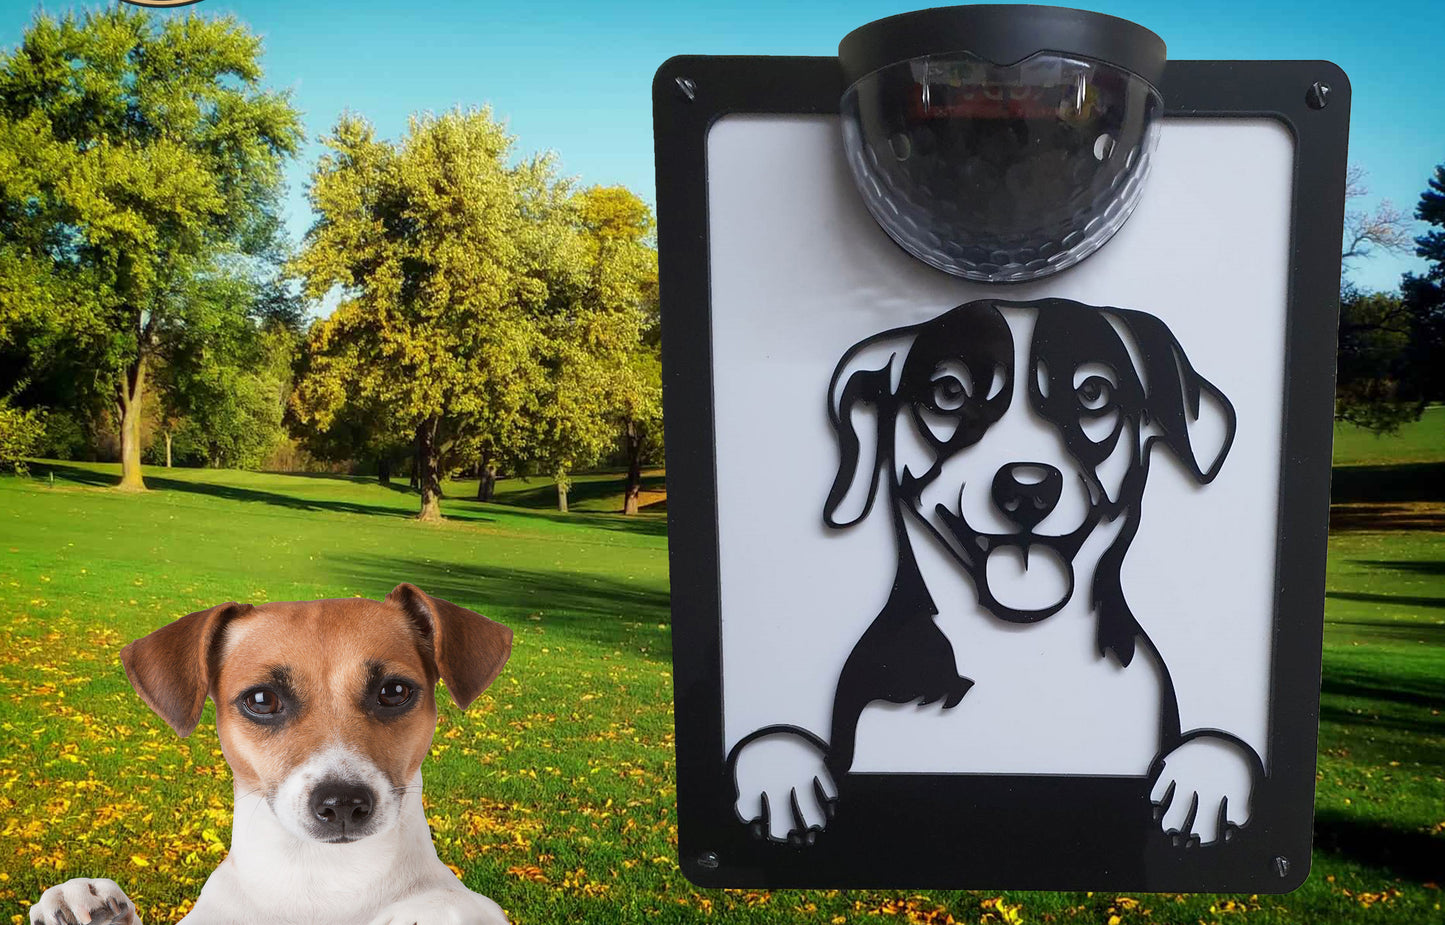 Garden Solar Light Wall Plaque.
Most Dog Breeds Available Please Message If You Cant See Your Breed.
Brighten Up Your Fences And Gardens With These Decorative Solar John Alans